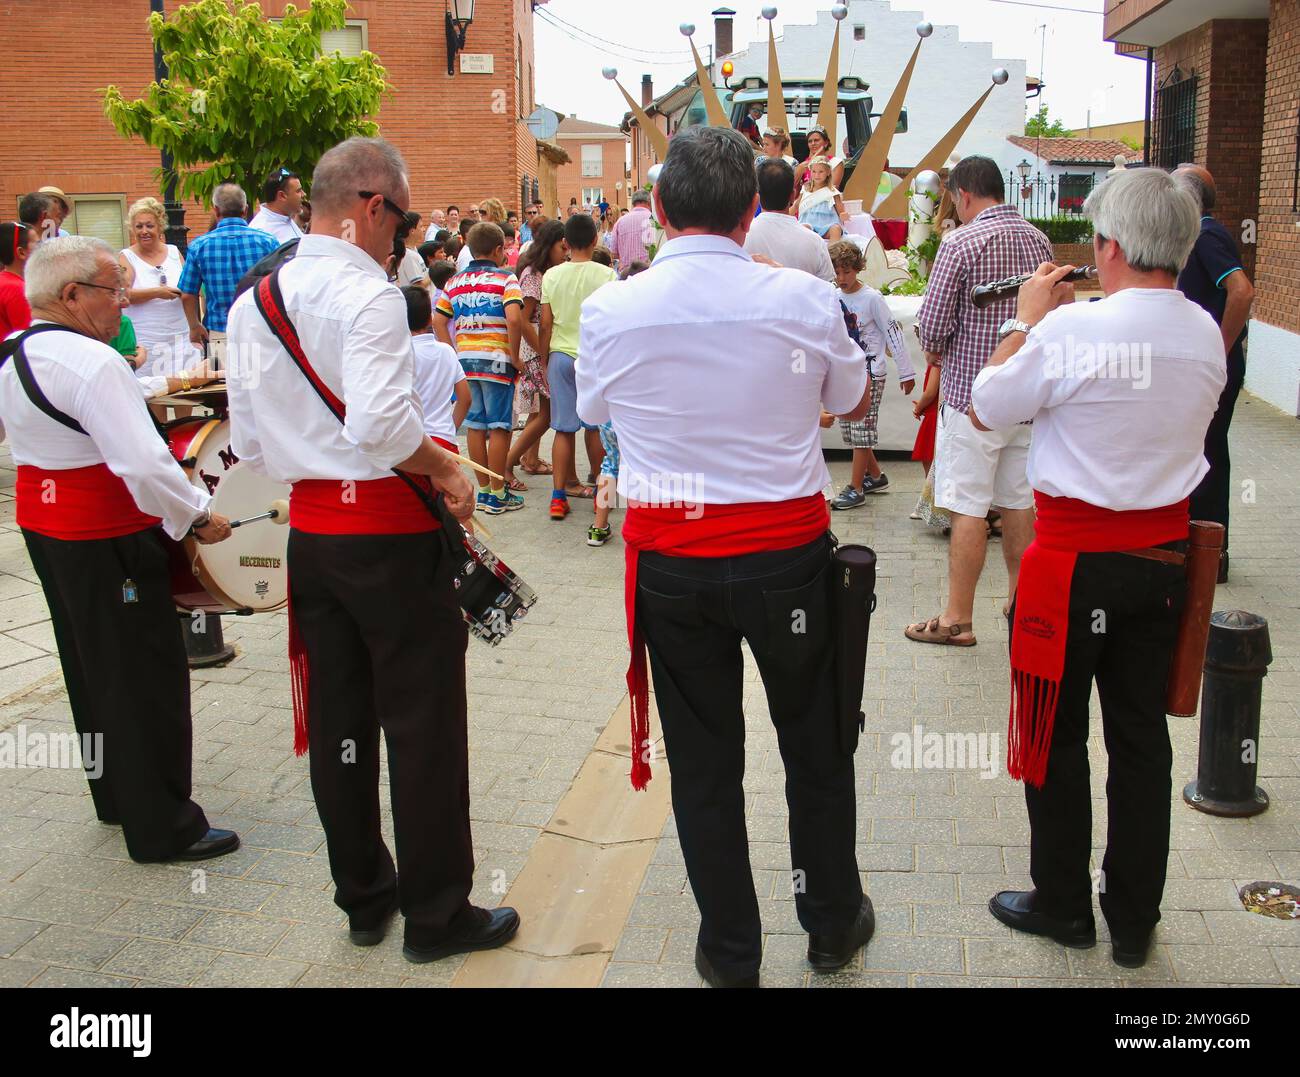 Village party queens on a float with a four piece band playing during the annual Assumption of the Virgin Mary 15 August celebrations Lantadilla Spain Stock Photo